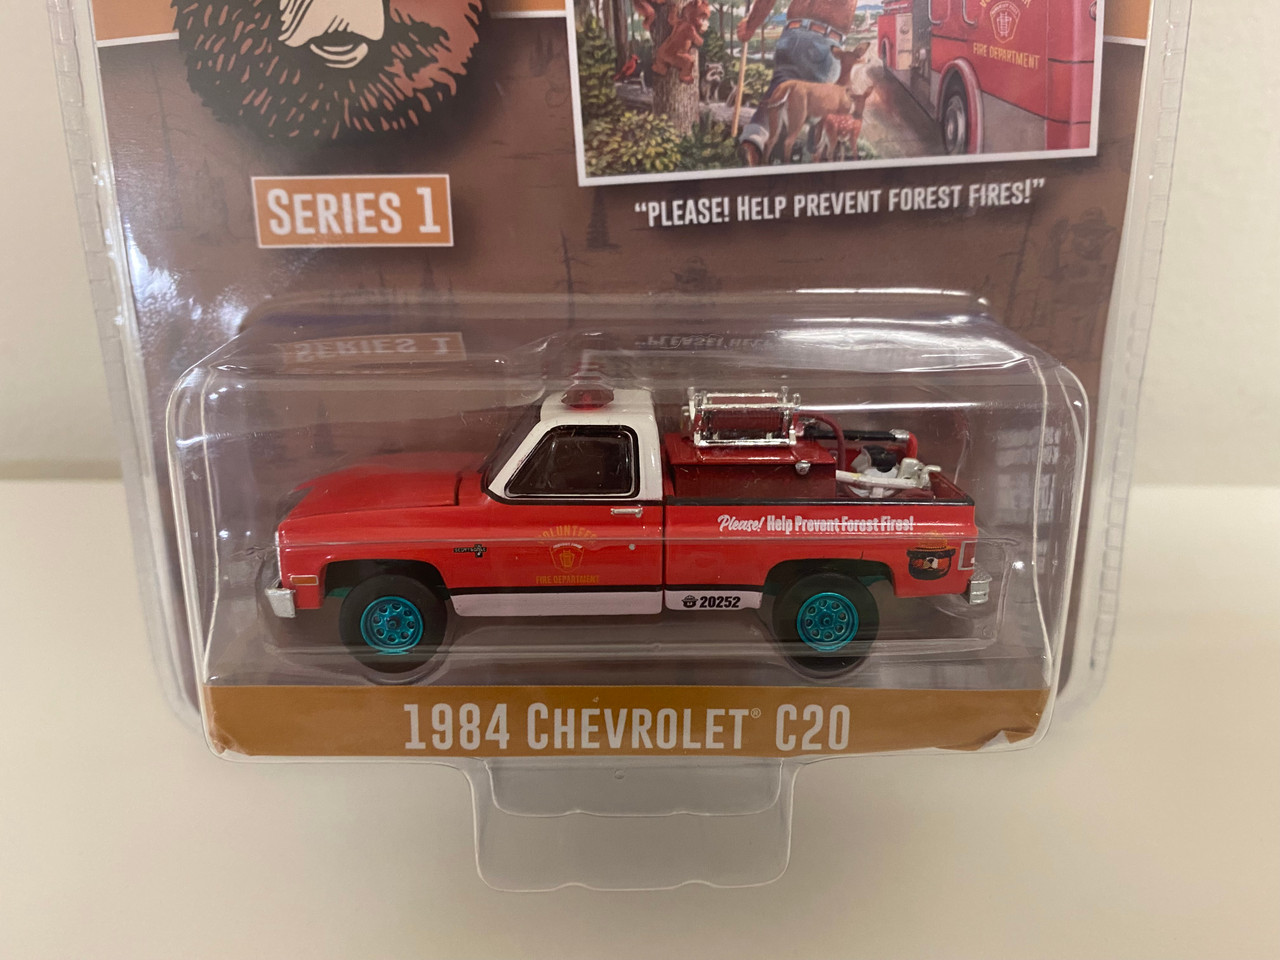 CHASE CAR 1984 Chevrolet C20 Pickup Truck with Fire Equipment Hose and Tank "Please! Help Prevent Forest Fires!" "Smokey Bear" Series 1 1/64 Diecast Model Car by Greenlight